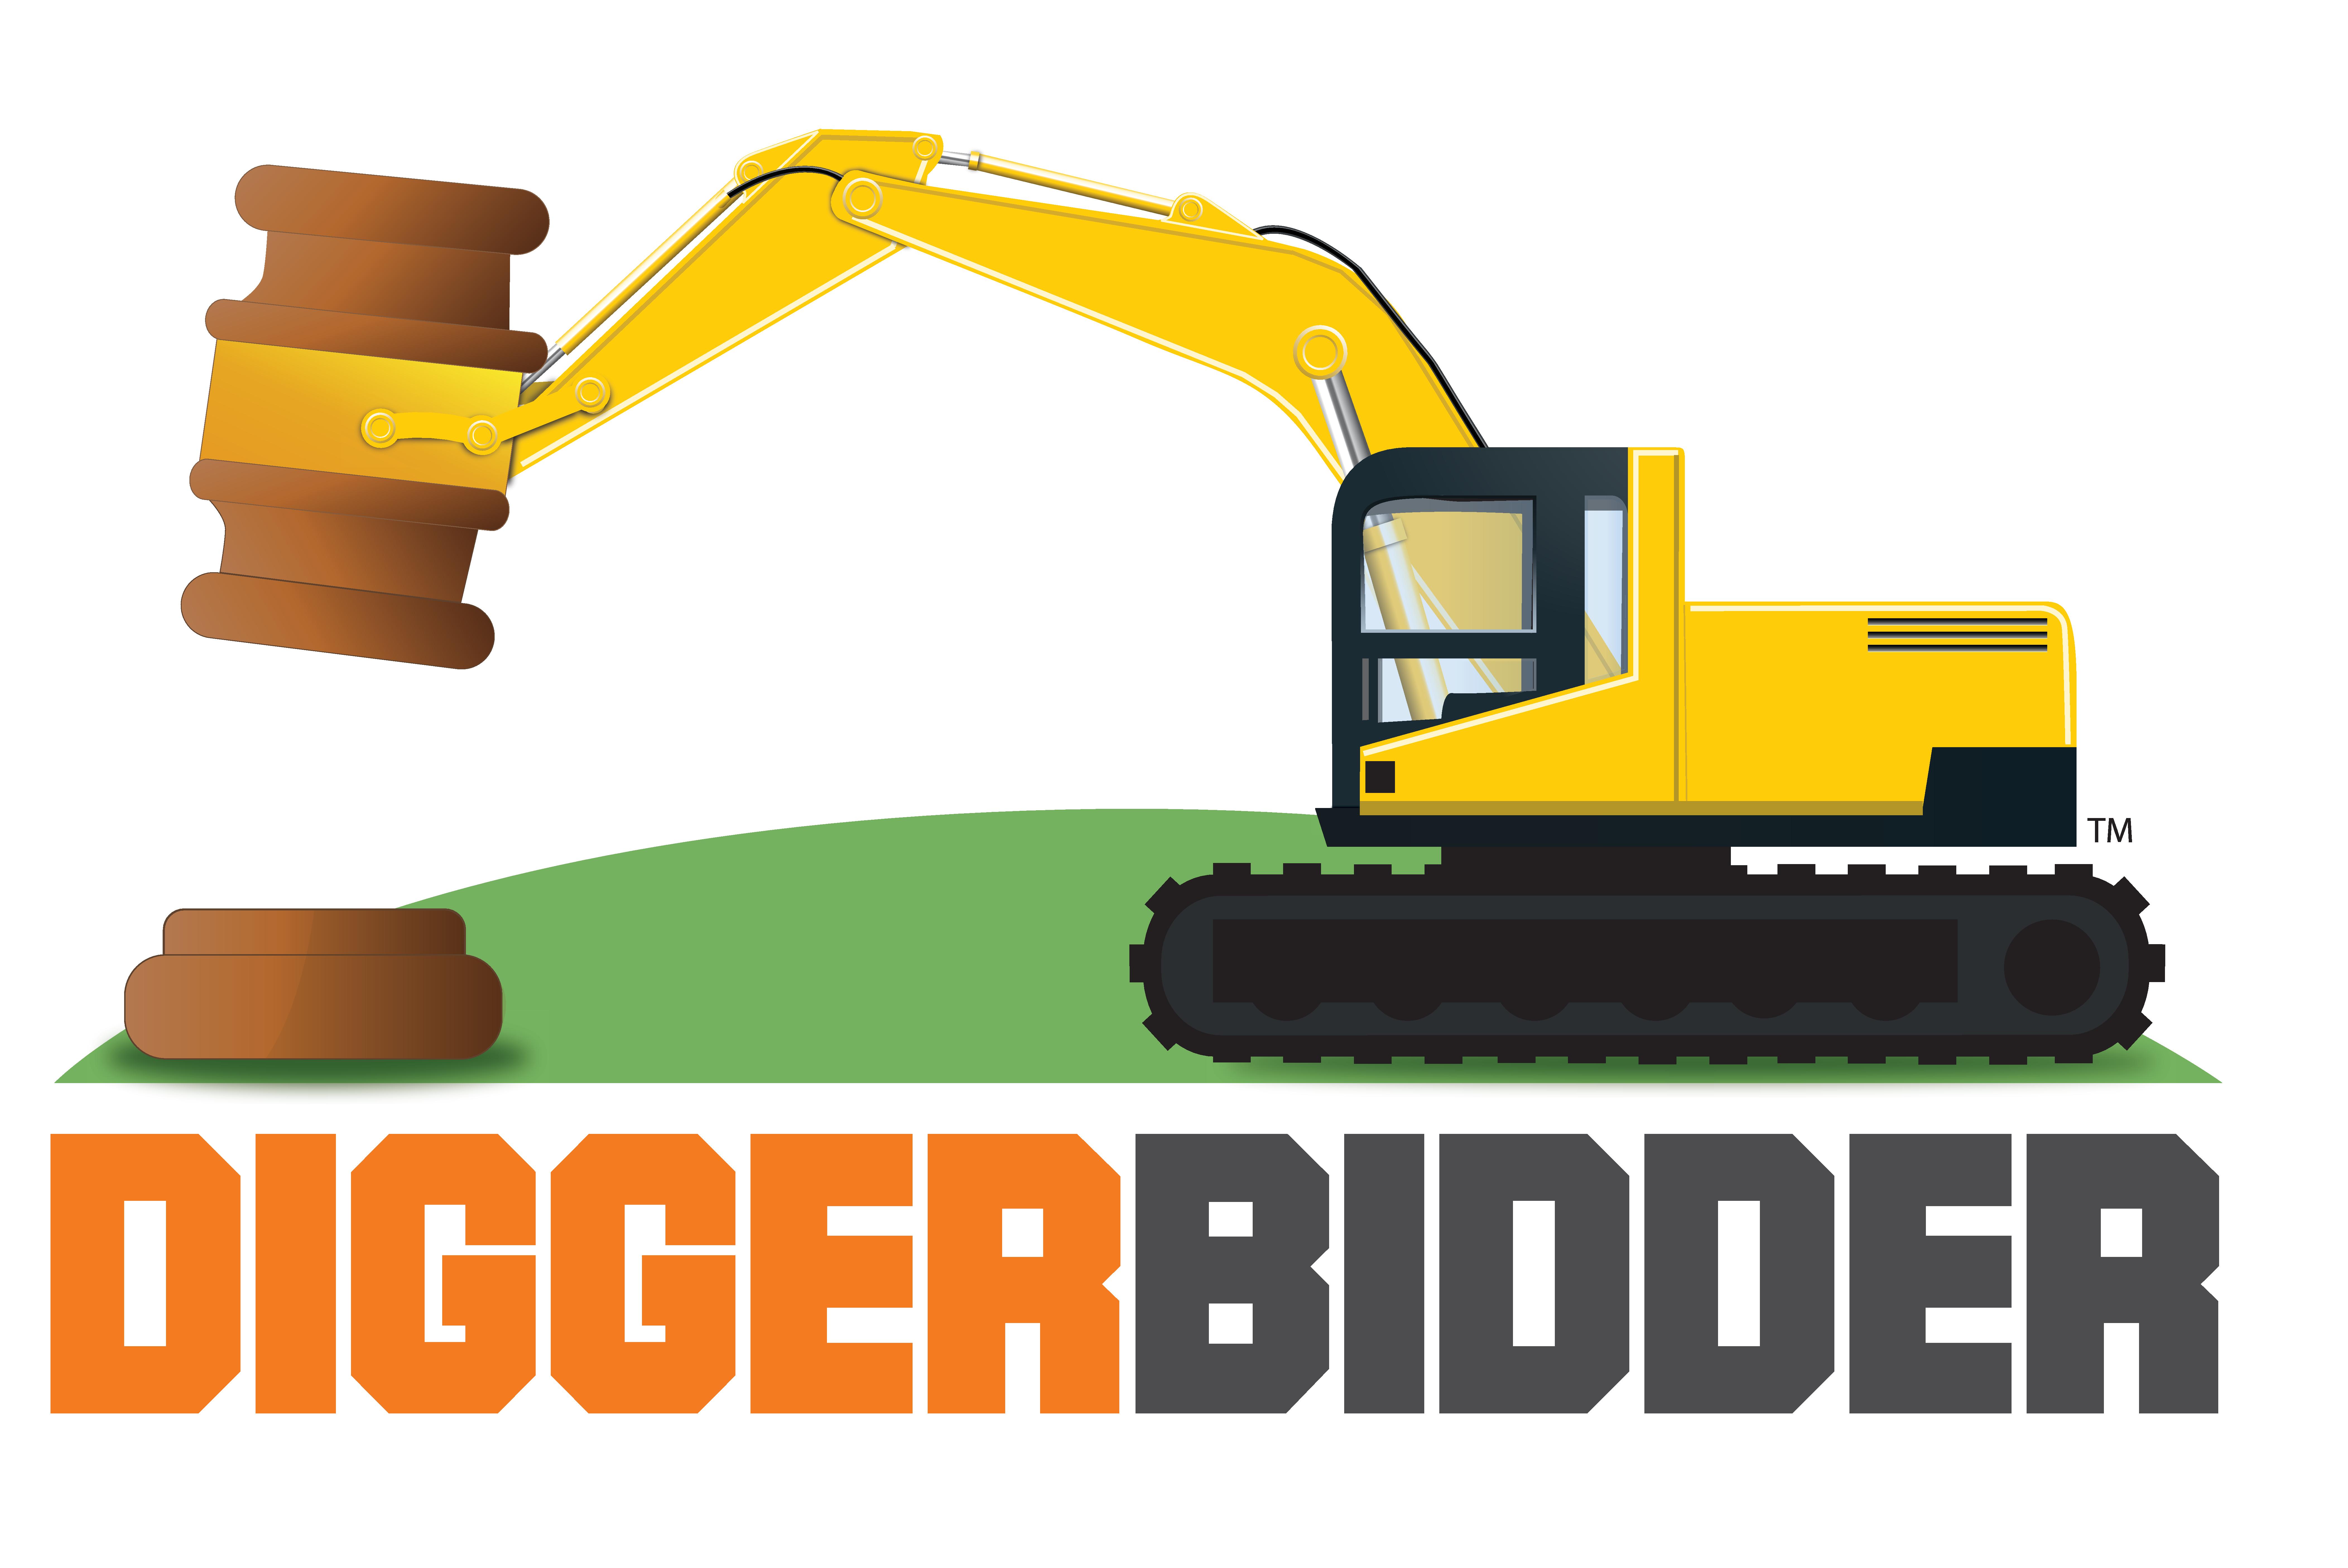 Excavator clipart plant machinery. Digger bidder the new